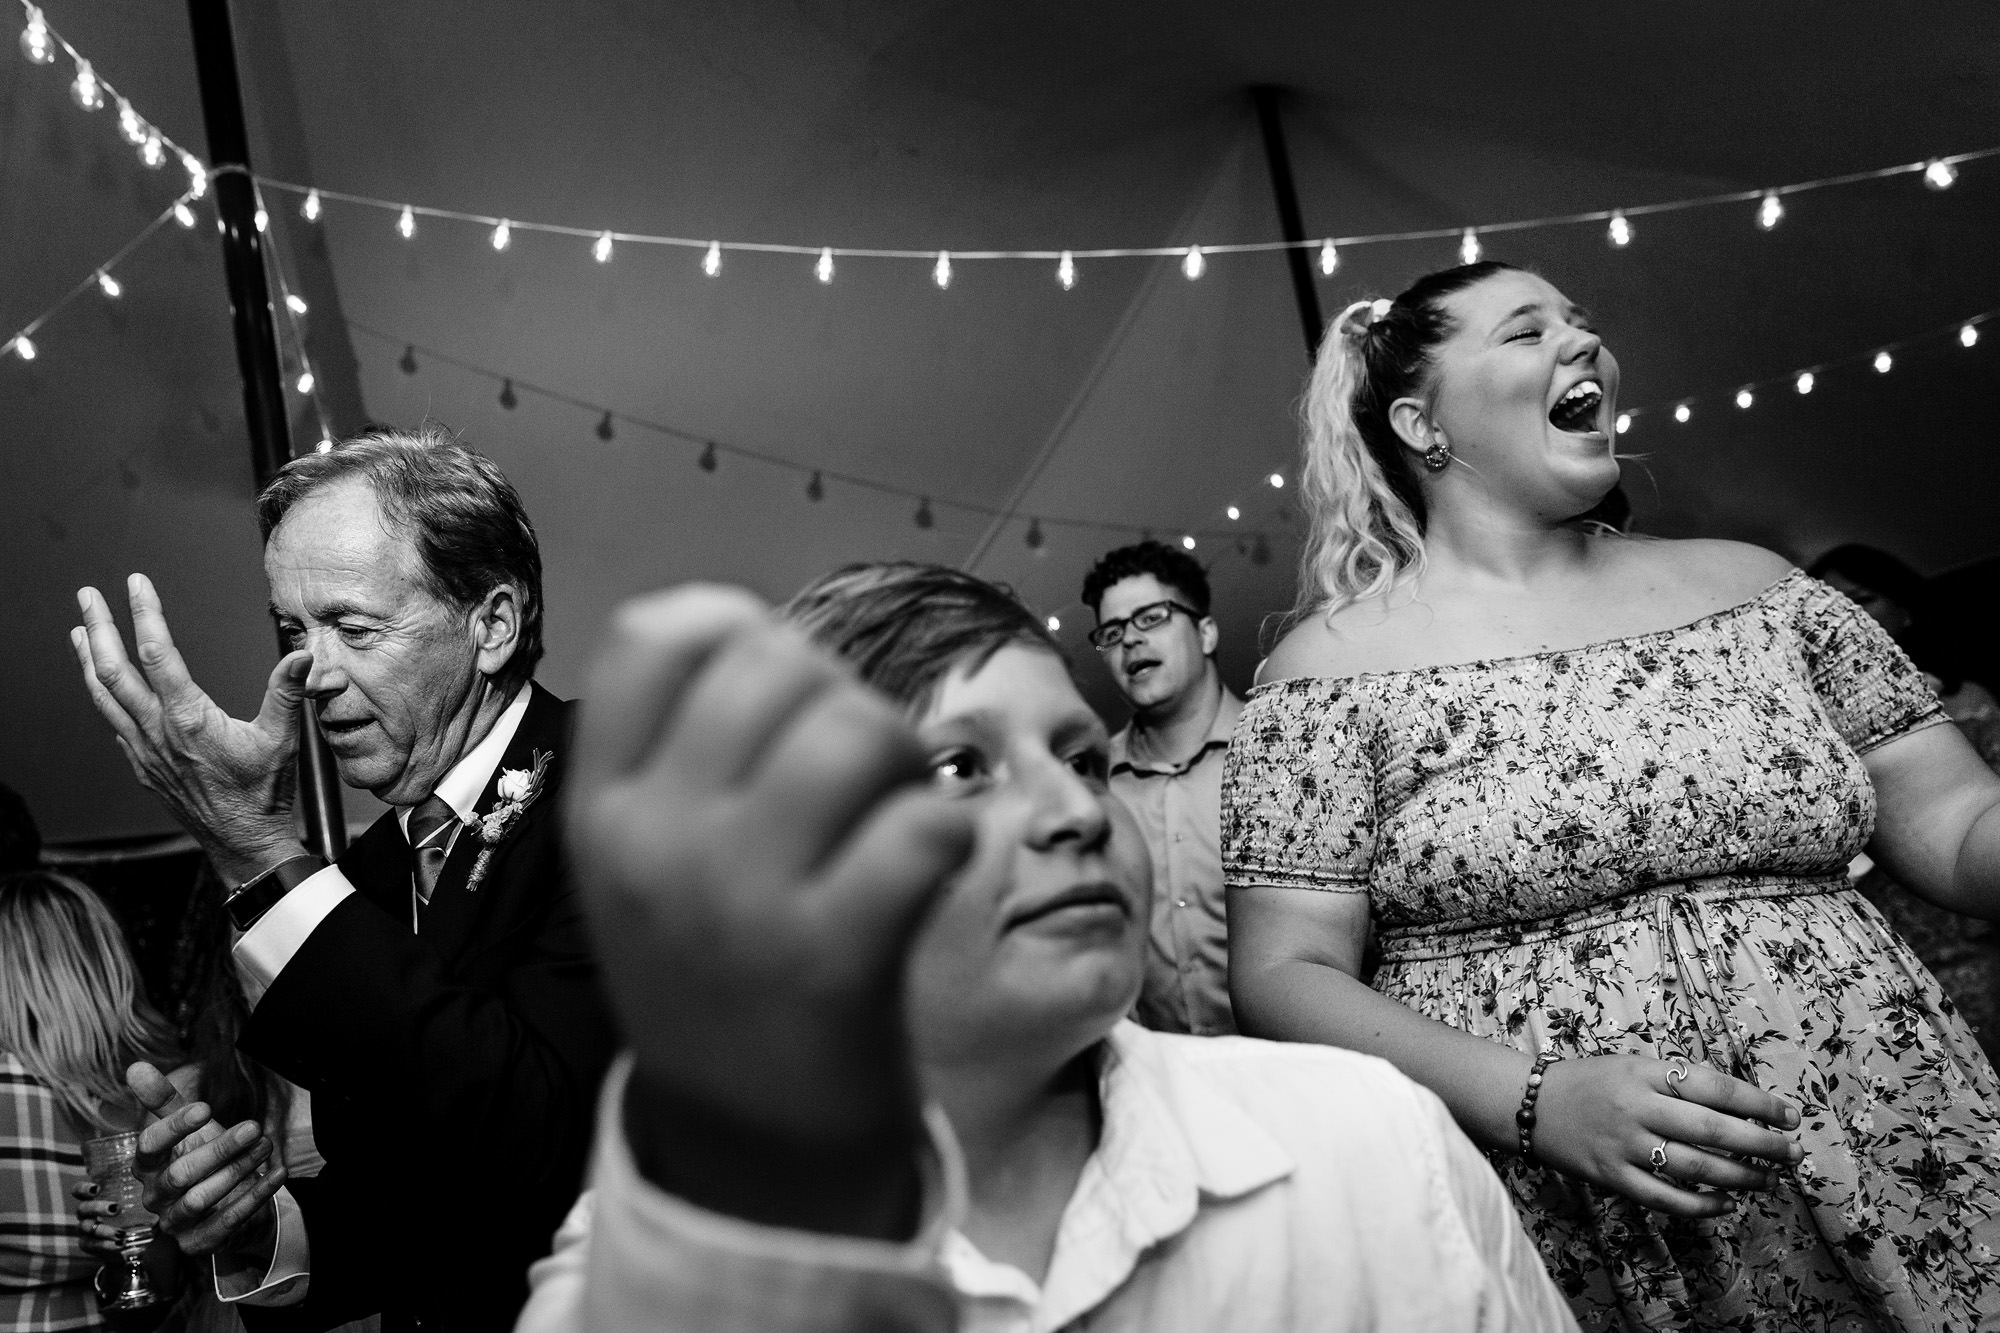 Candid dancing photos at a private residence Lamoine Maine wedding